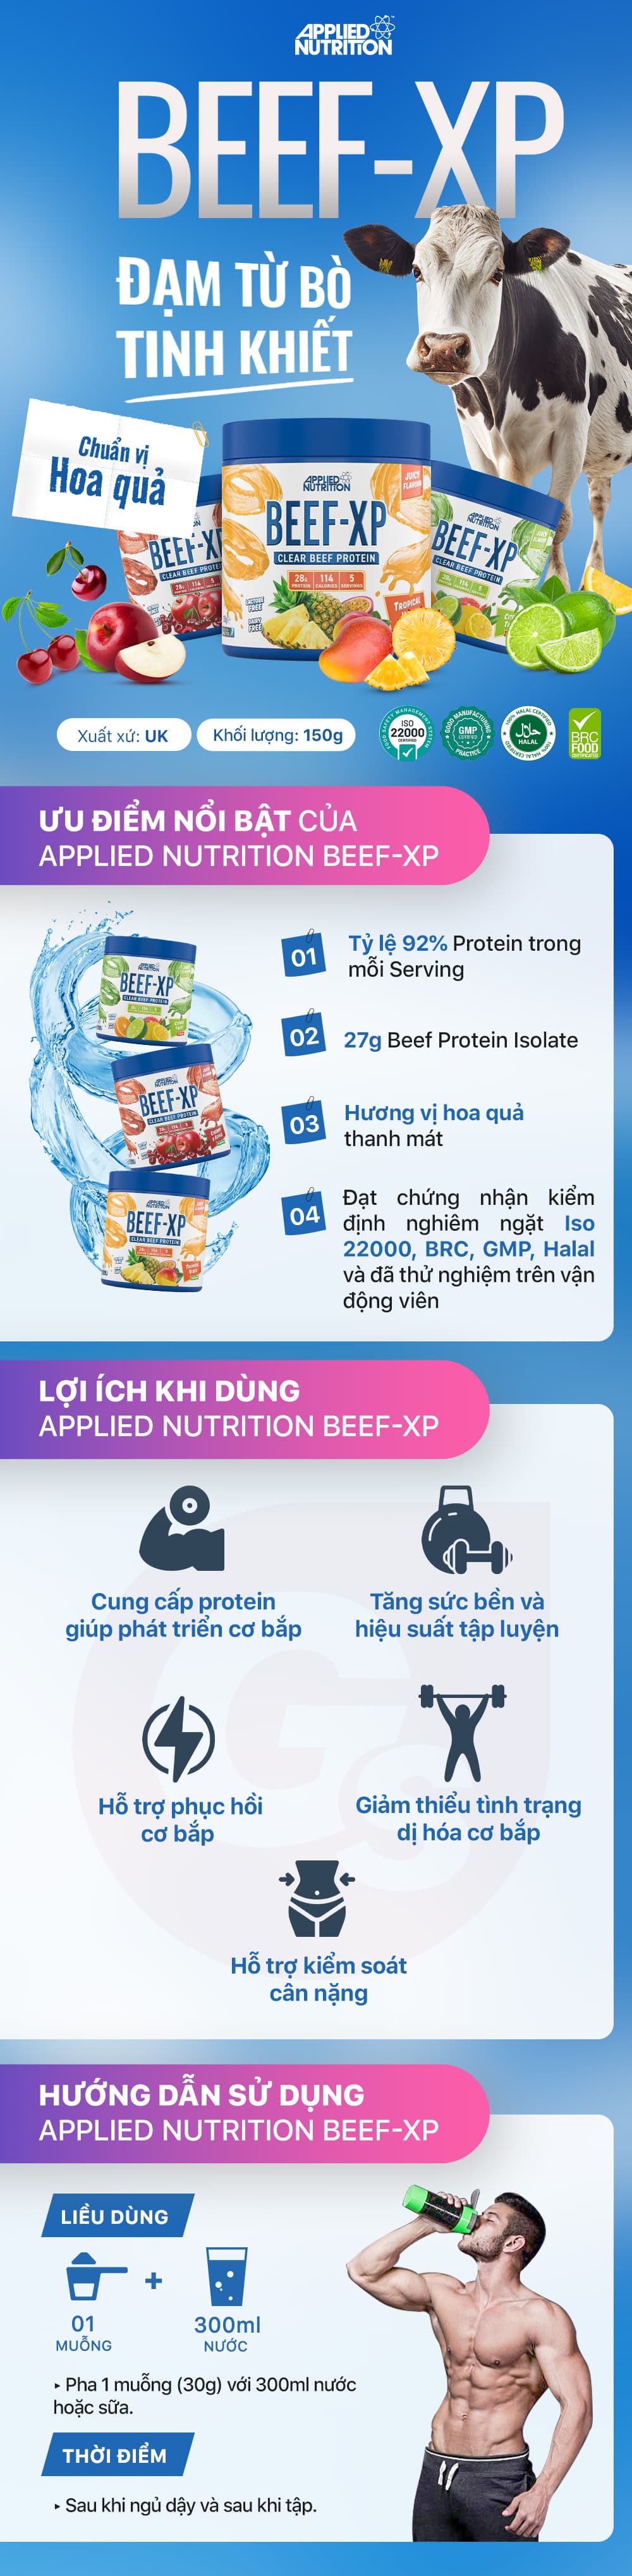 applied-nutrition-beef-xp-bot-protein-vi-hoa-qua-gymstore